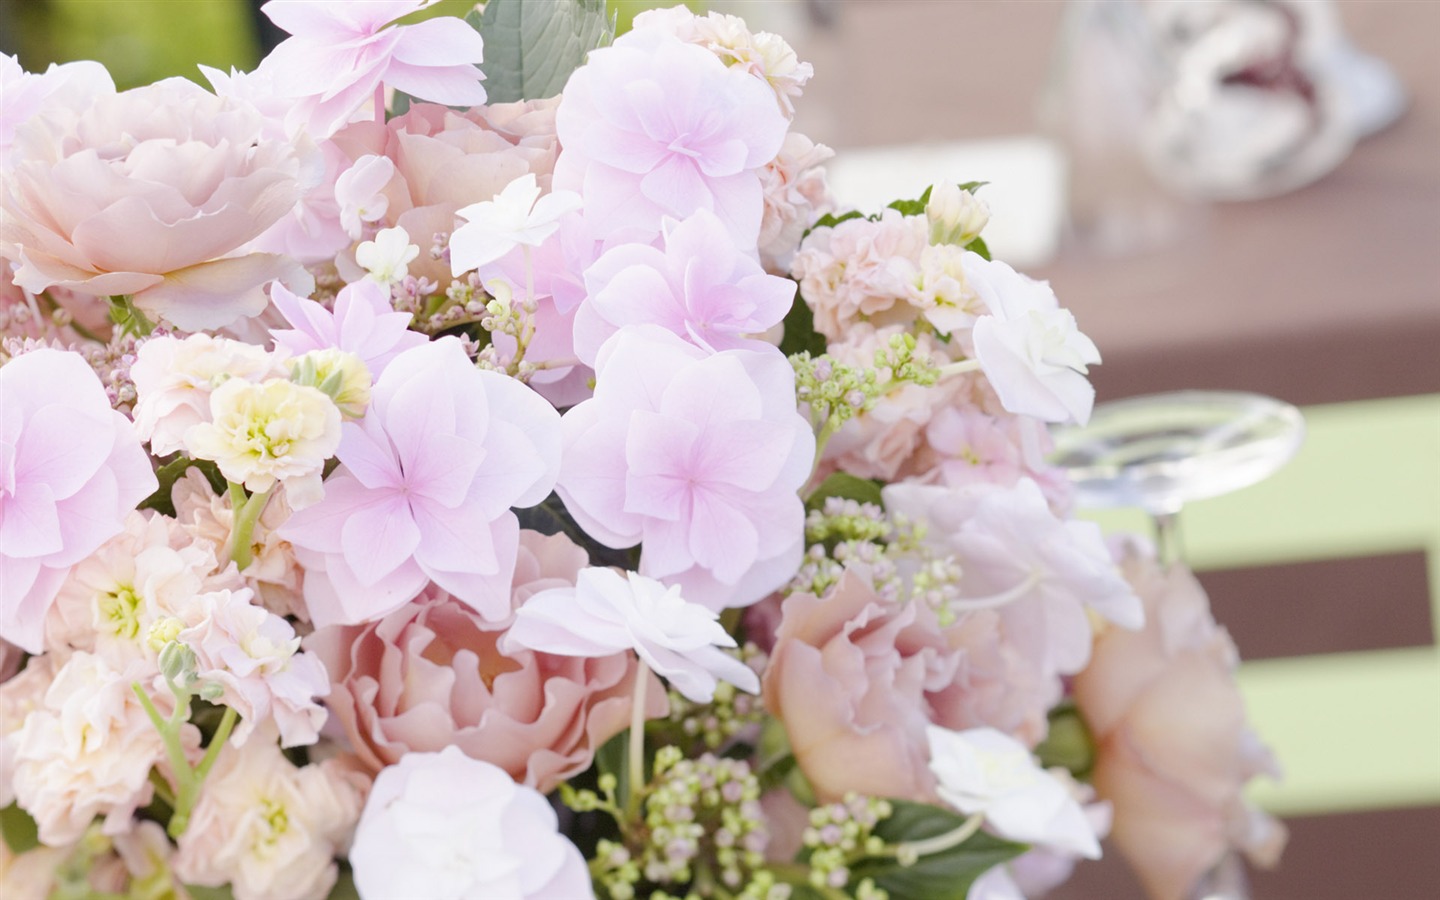 Weddings and Flowers wallpaper (2) #4 - 1440x900